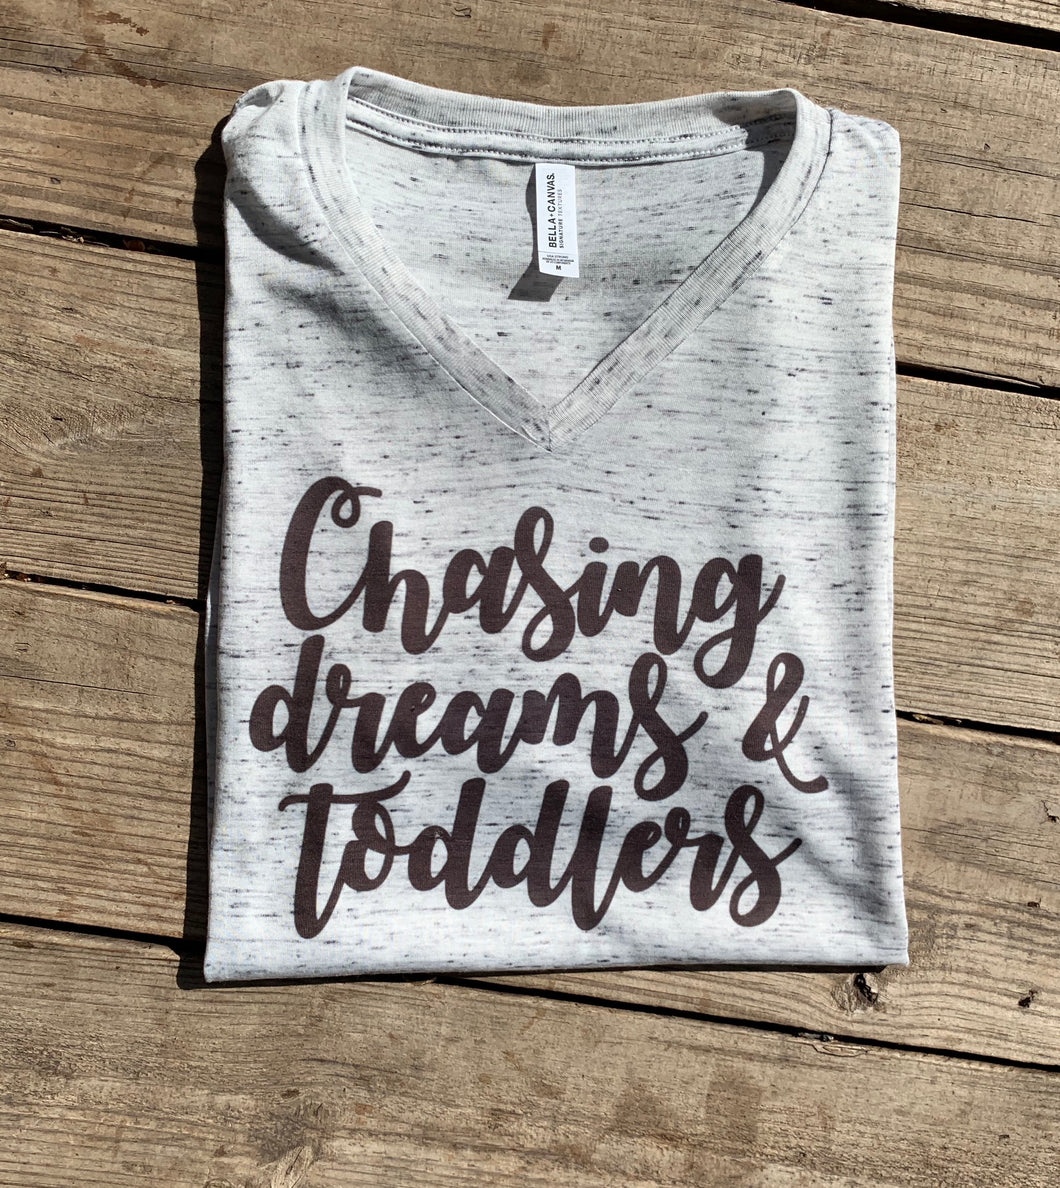 Chasing Toddlers & Dreams